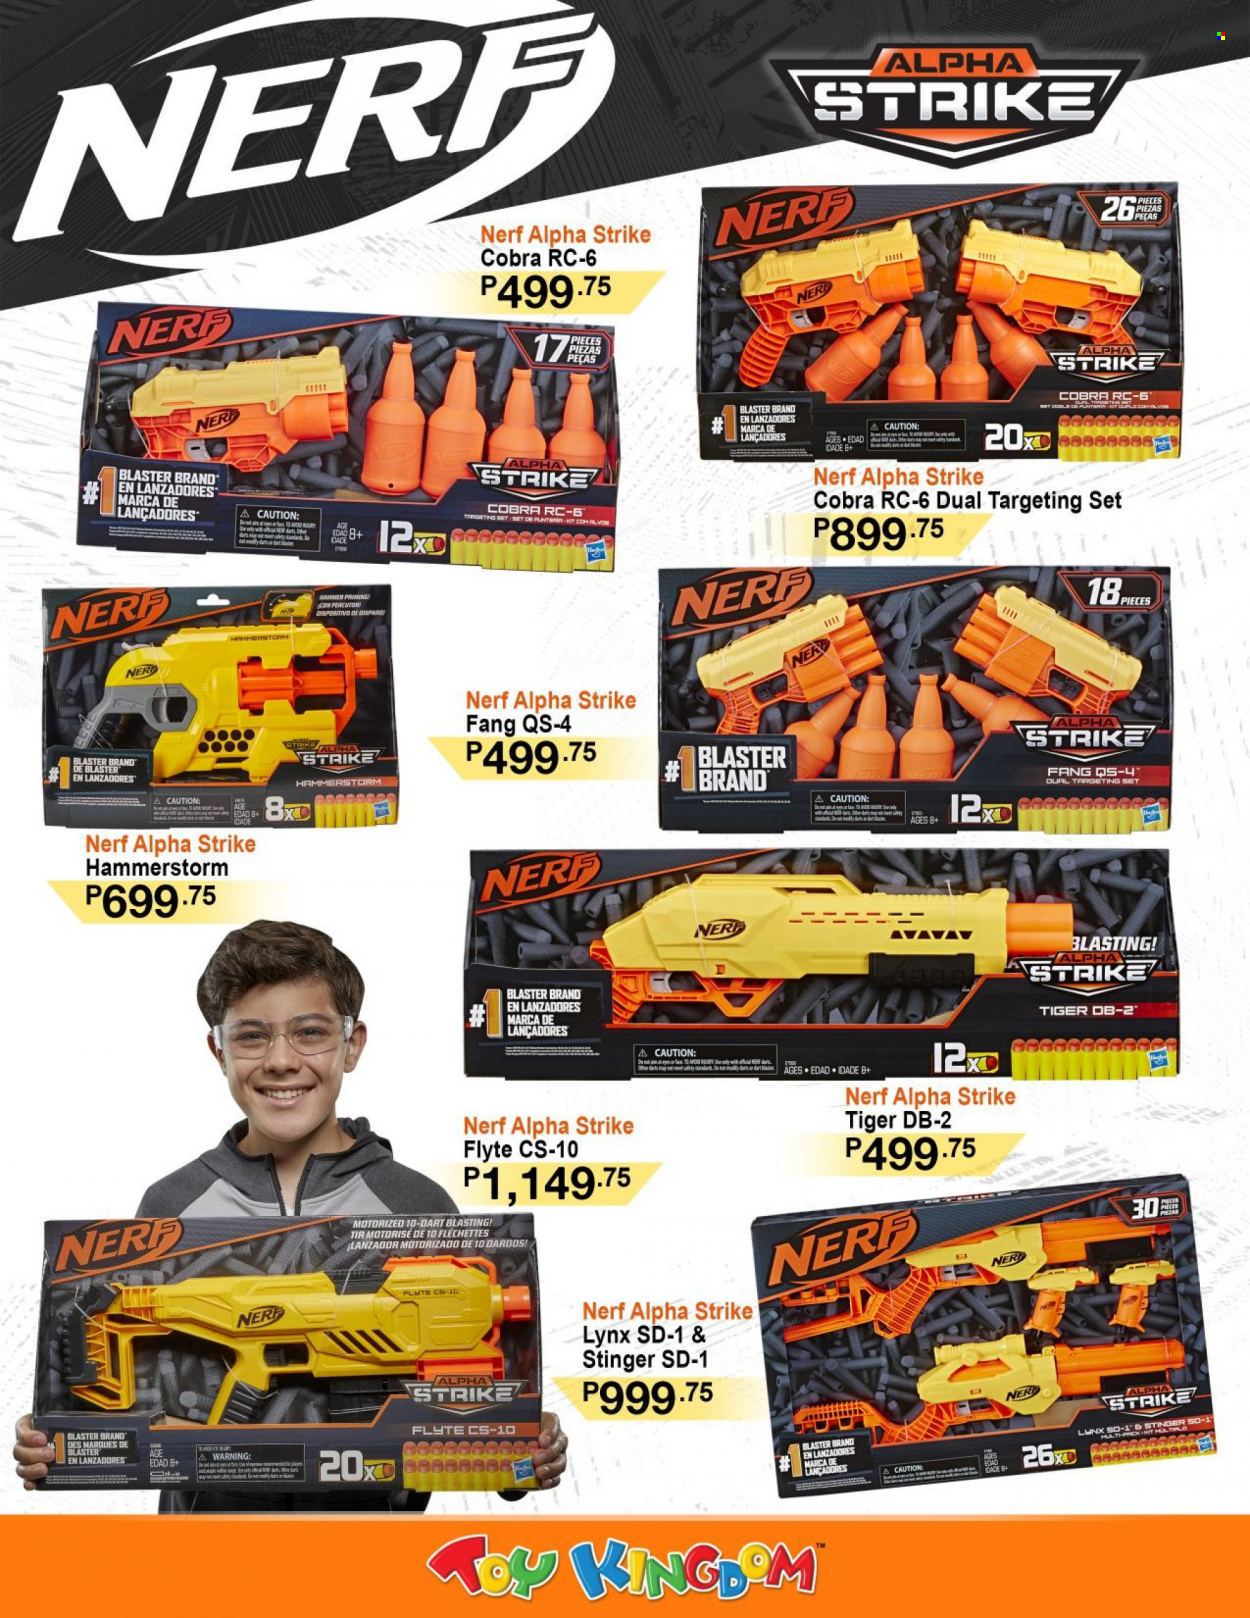 Toy Kingdom offer . Page 6.